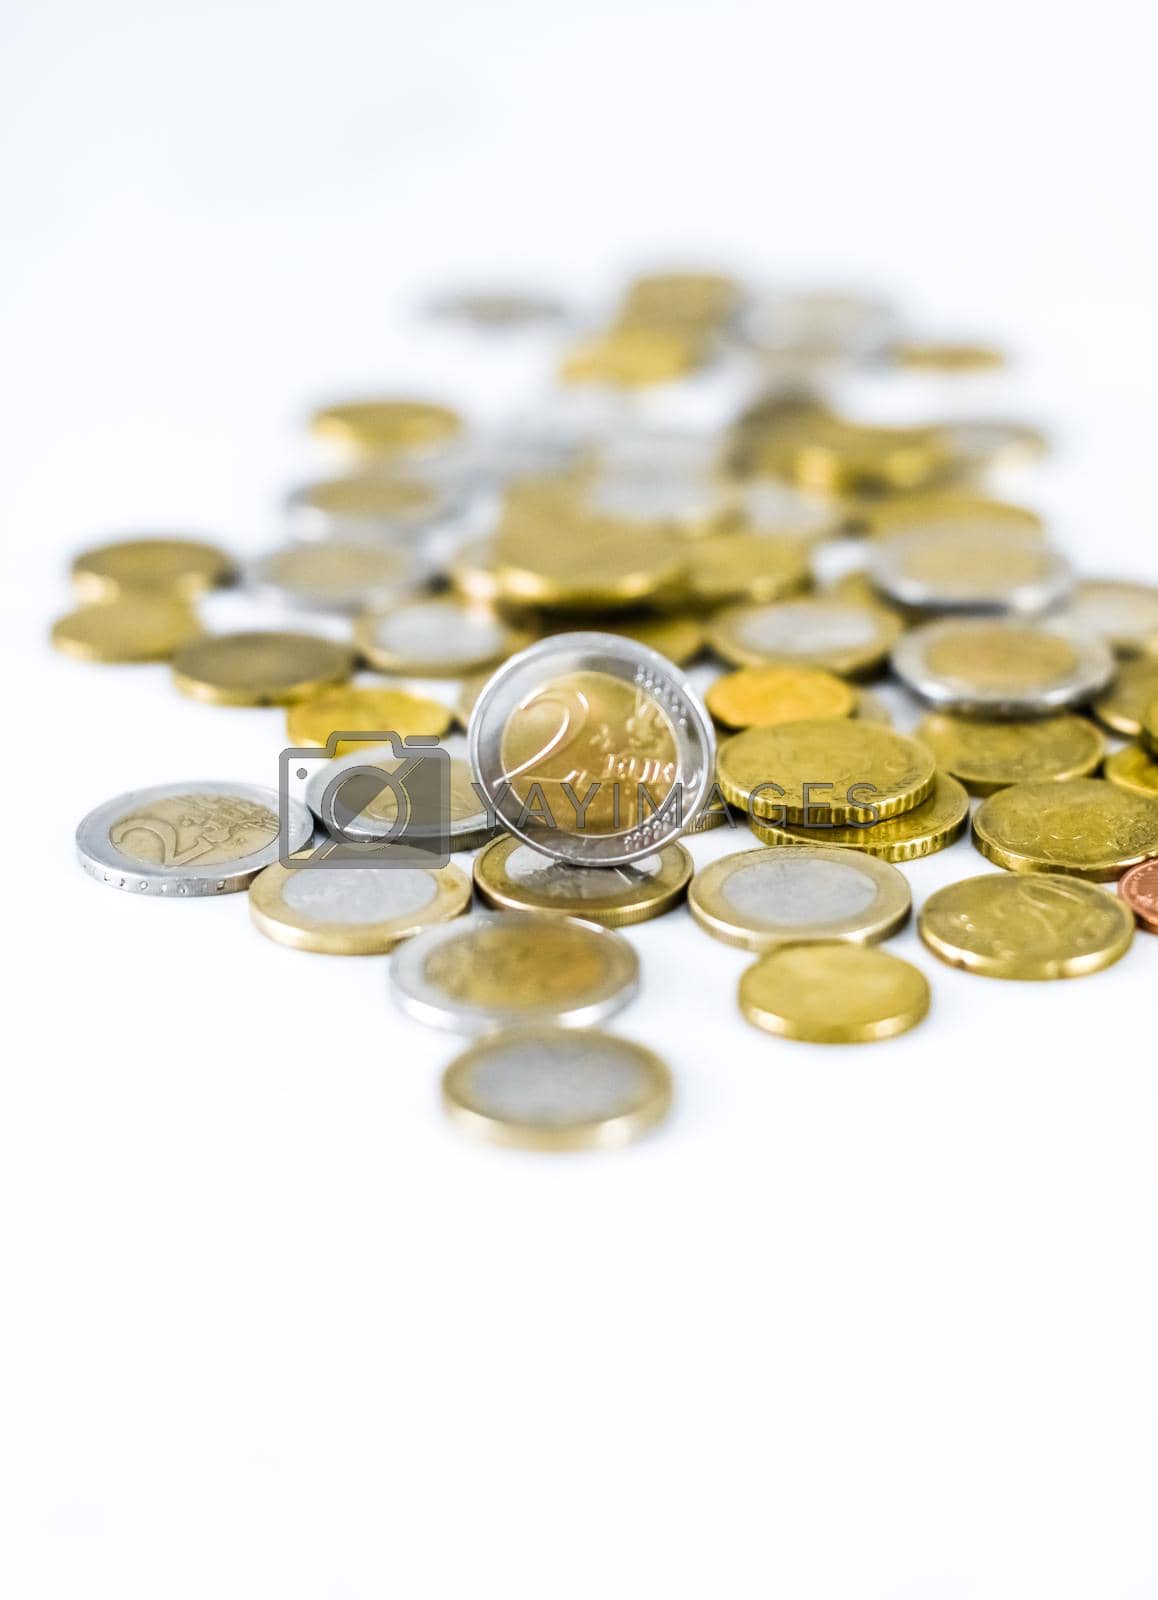 Royalty free image of Euro coins, European Union currency by Anneleven